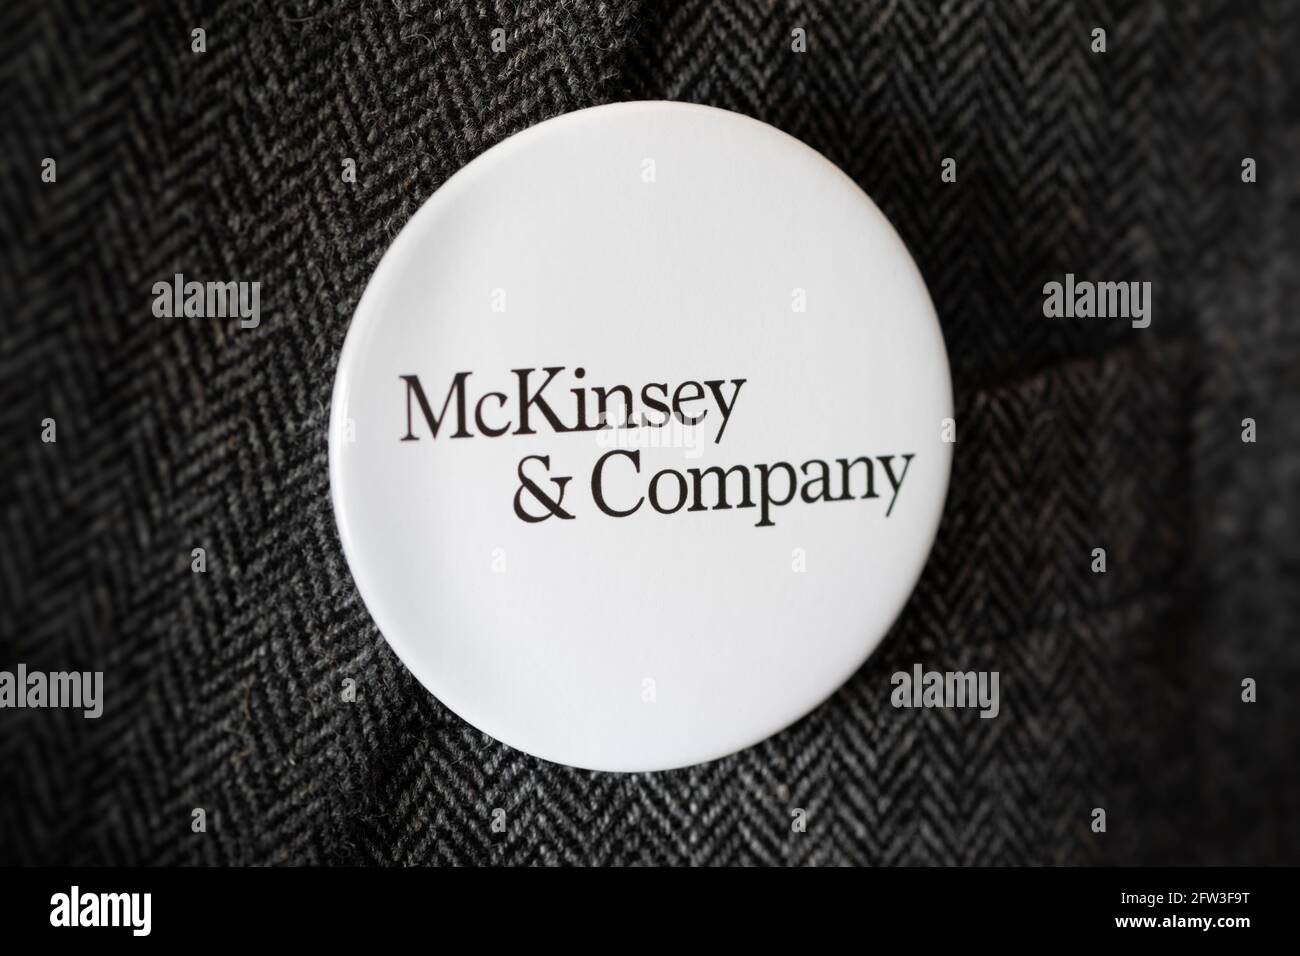 A button badge bearing the logo of McKinsey & Company fastened to a suit jacket. Stock Photo